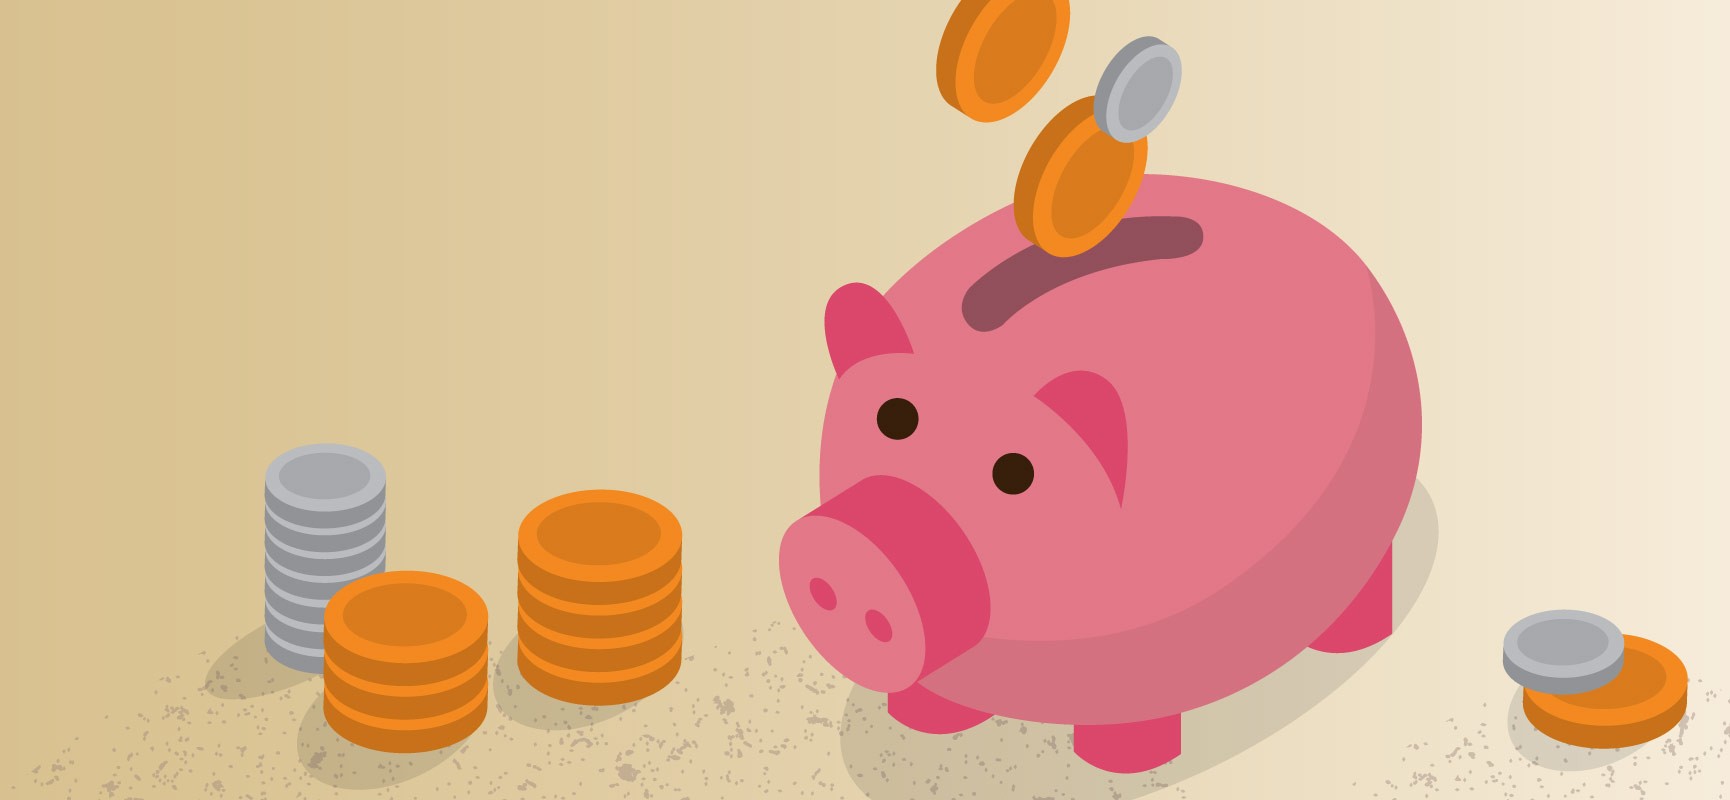 An illustration of a piggy bank with coins in it